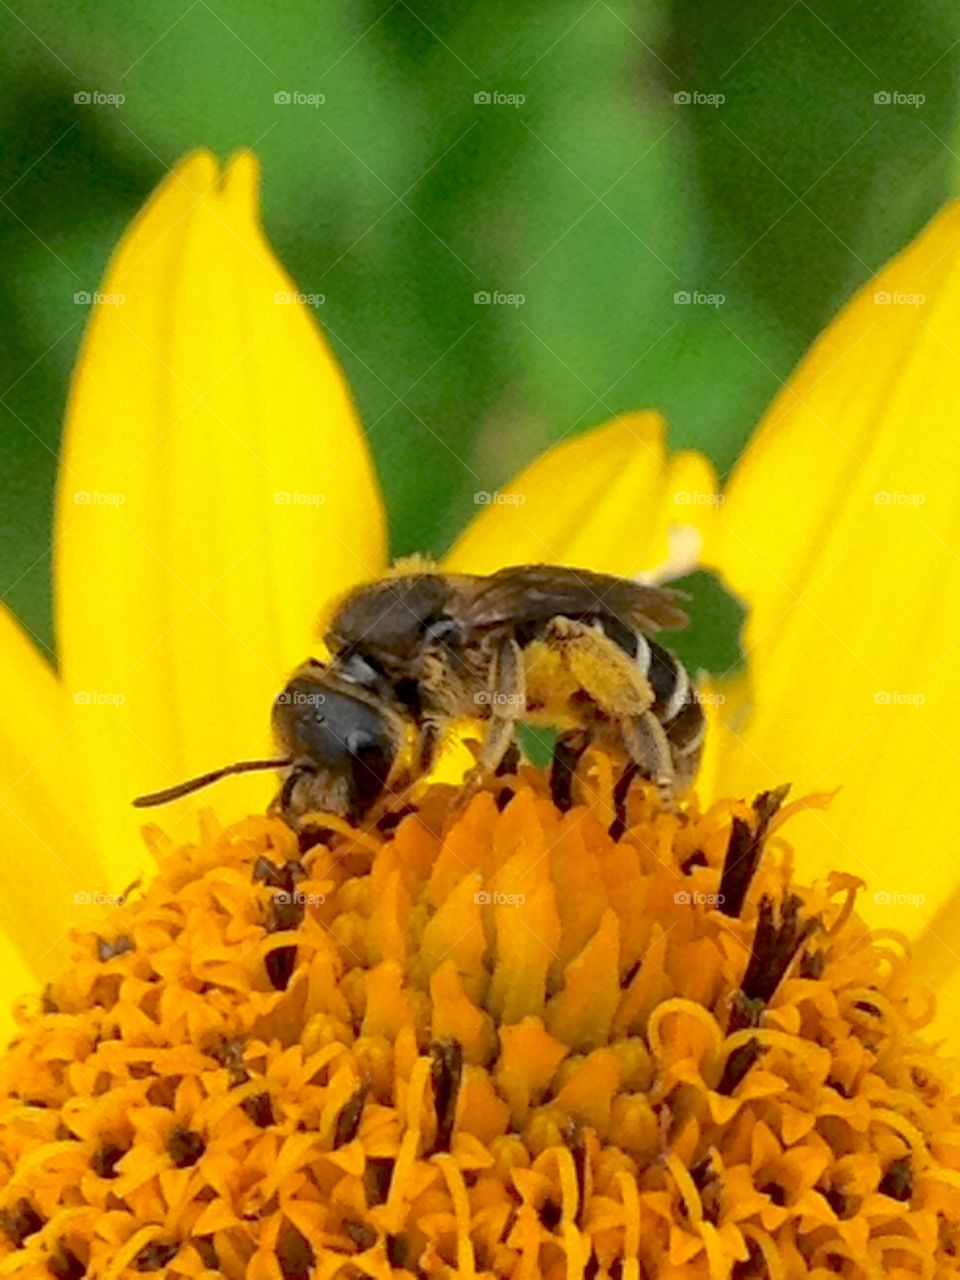 Summer..bee..worth collecting pollen,so small and works tirelessly